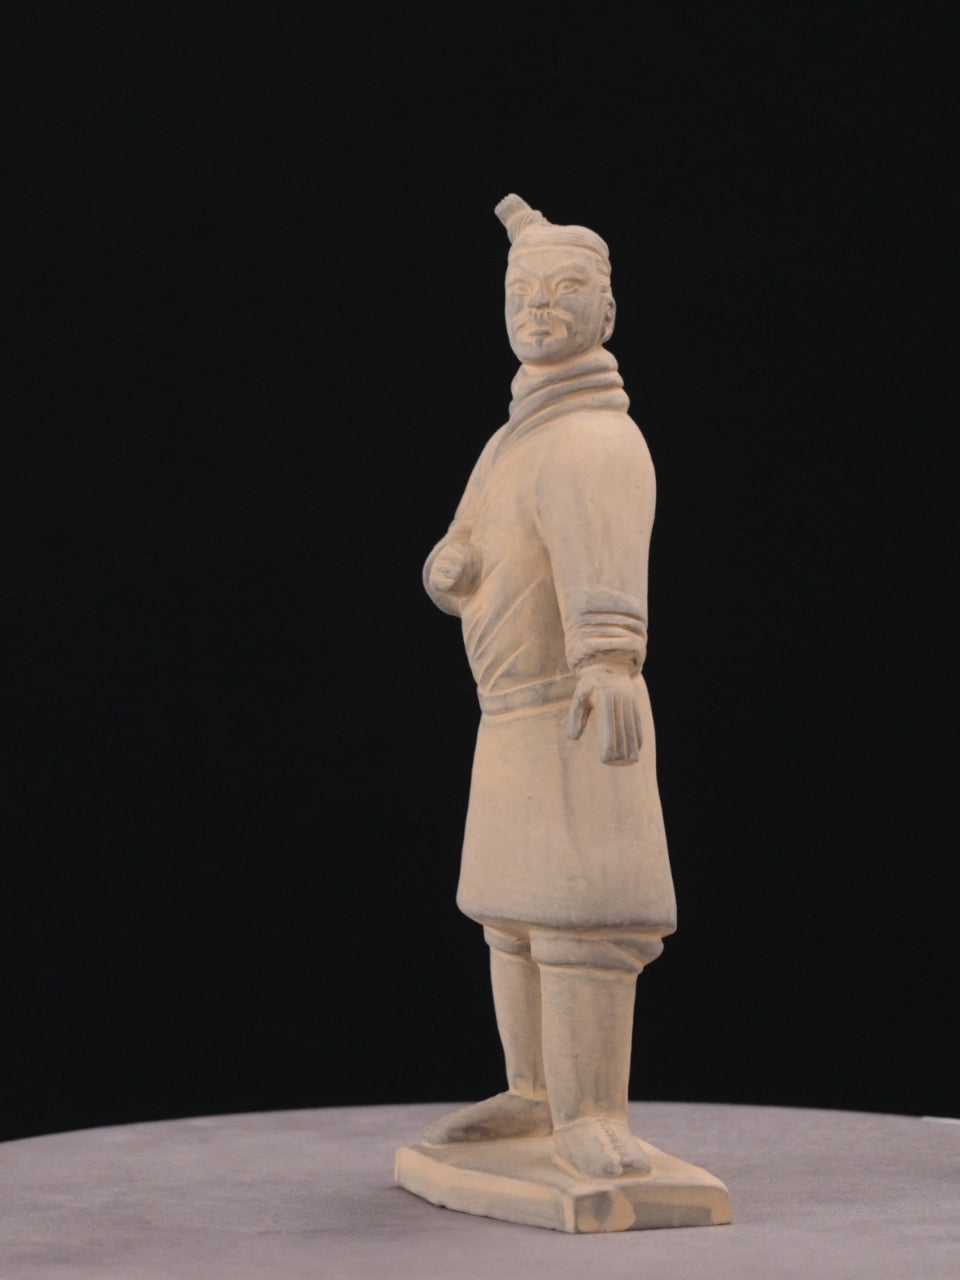 Unveil the grandeur of our 25CM Terracotta Army Standing Archer through this captivating video. Experience the lifelike pose, intricate details, and historical authenticity of this expertly crafted figurine. Immerse yourself in the rich history of ancient China brought to life in this larger-than-life replica.